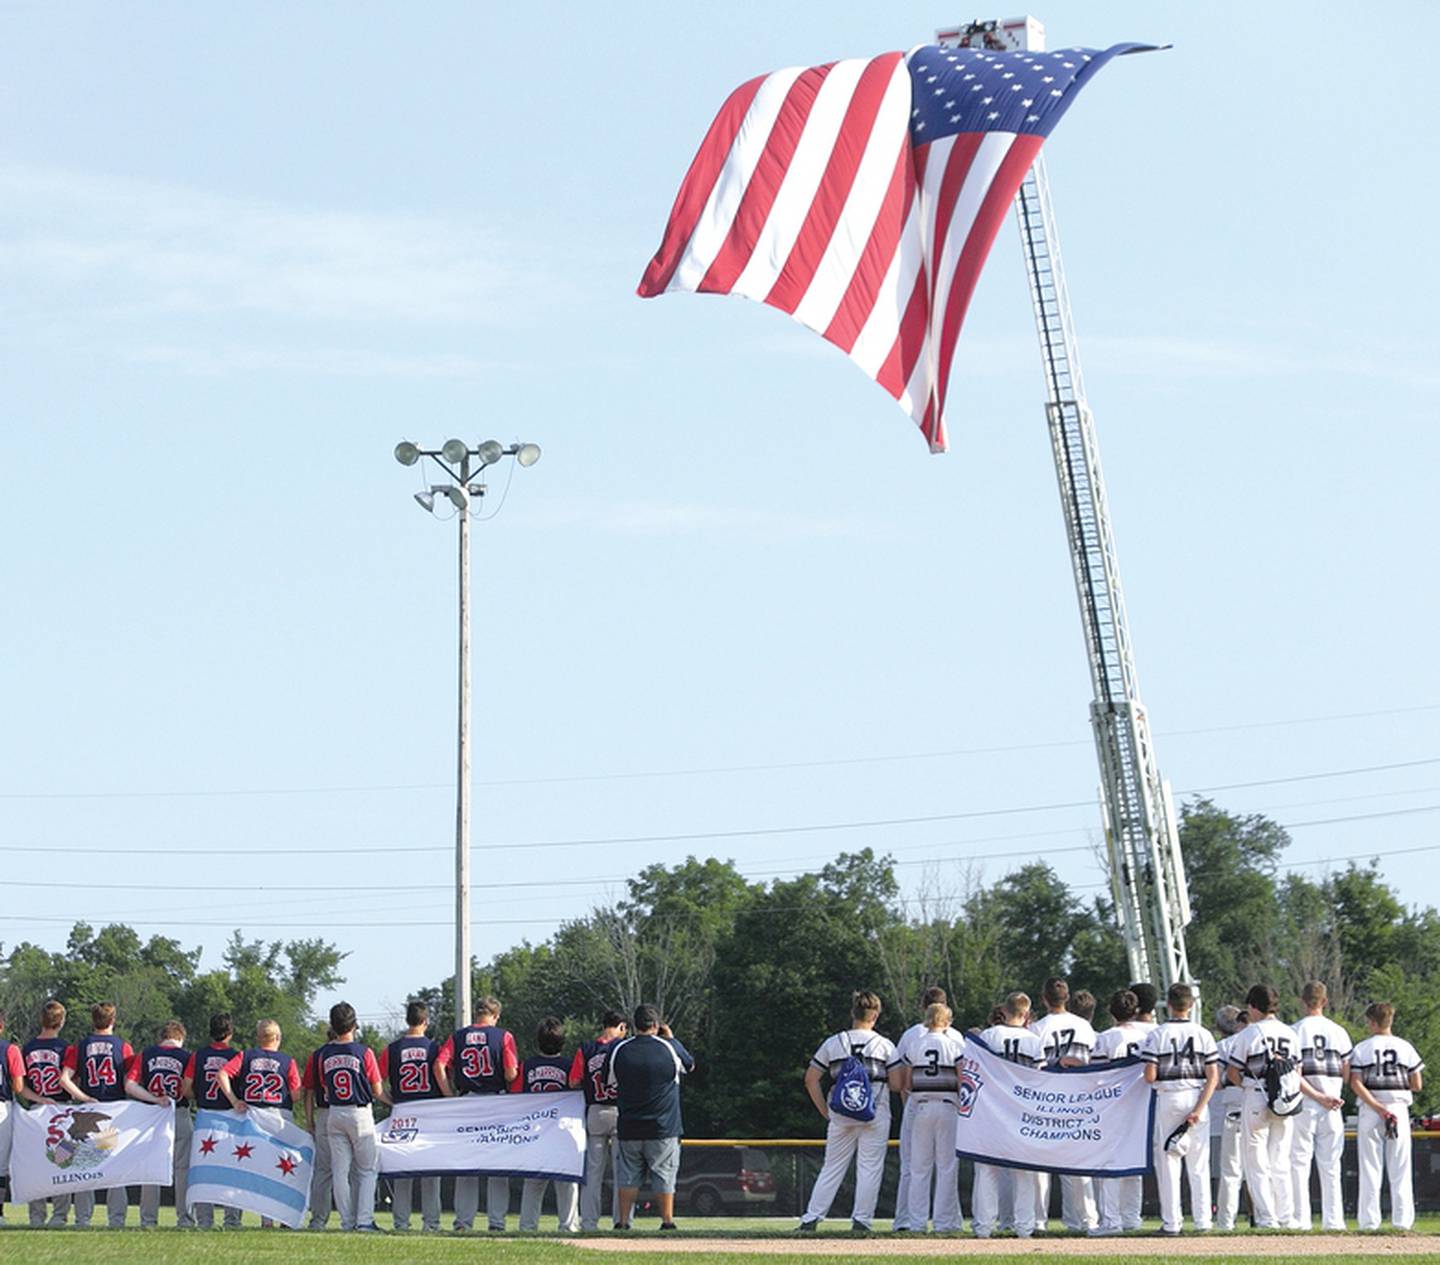 Members of District 20 Senior League champion Ottawa (right) and Illinois state champion Clear Ridge stand in front of a giant flag provided by the City of Peru during the playing of the national anthem at a past Central Region Section tournament hosted by District 20 Little League.